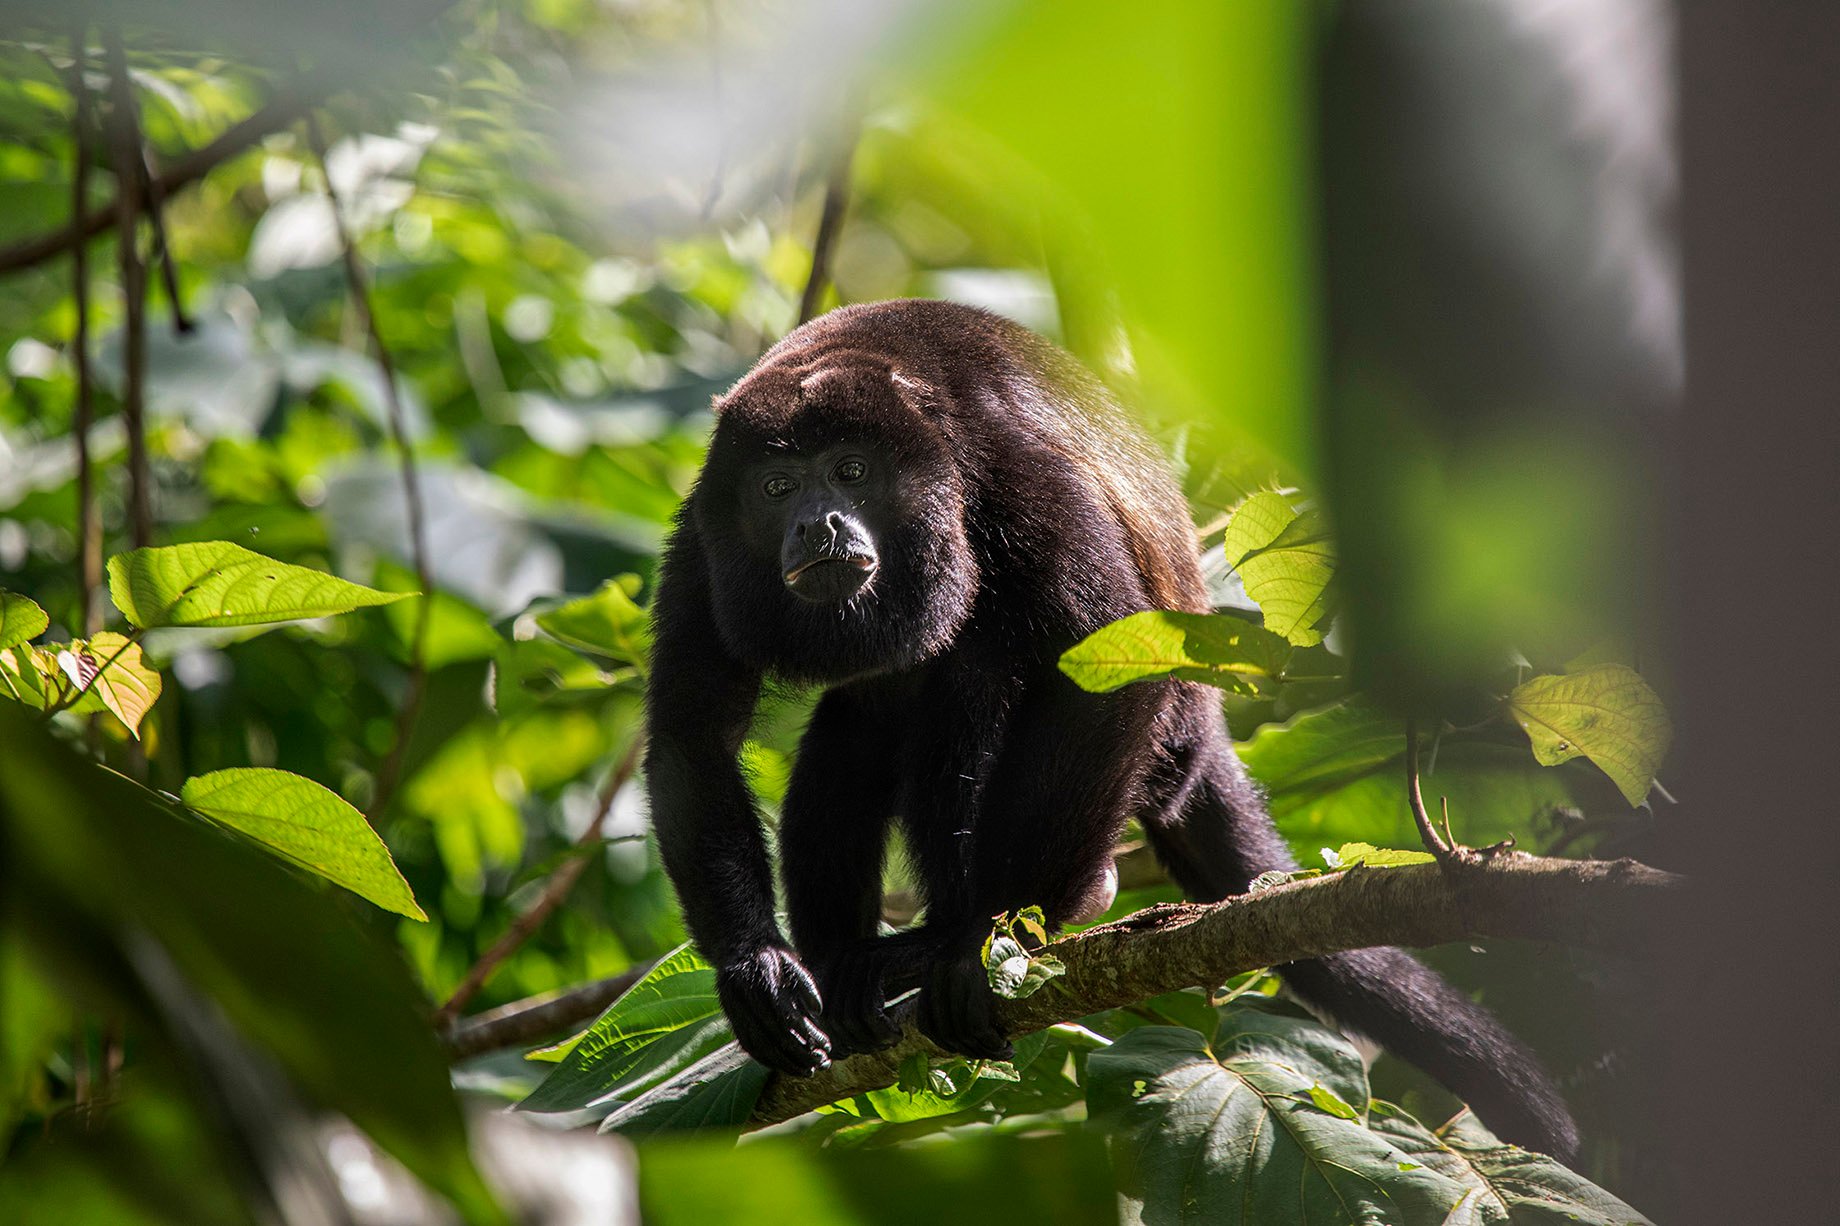 Monkey in Costa Rican rainforest shot by Cristina Candel for Viajar